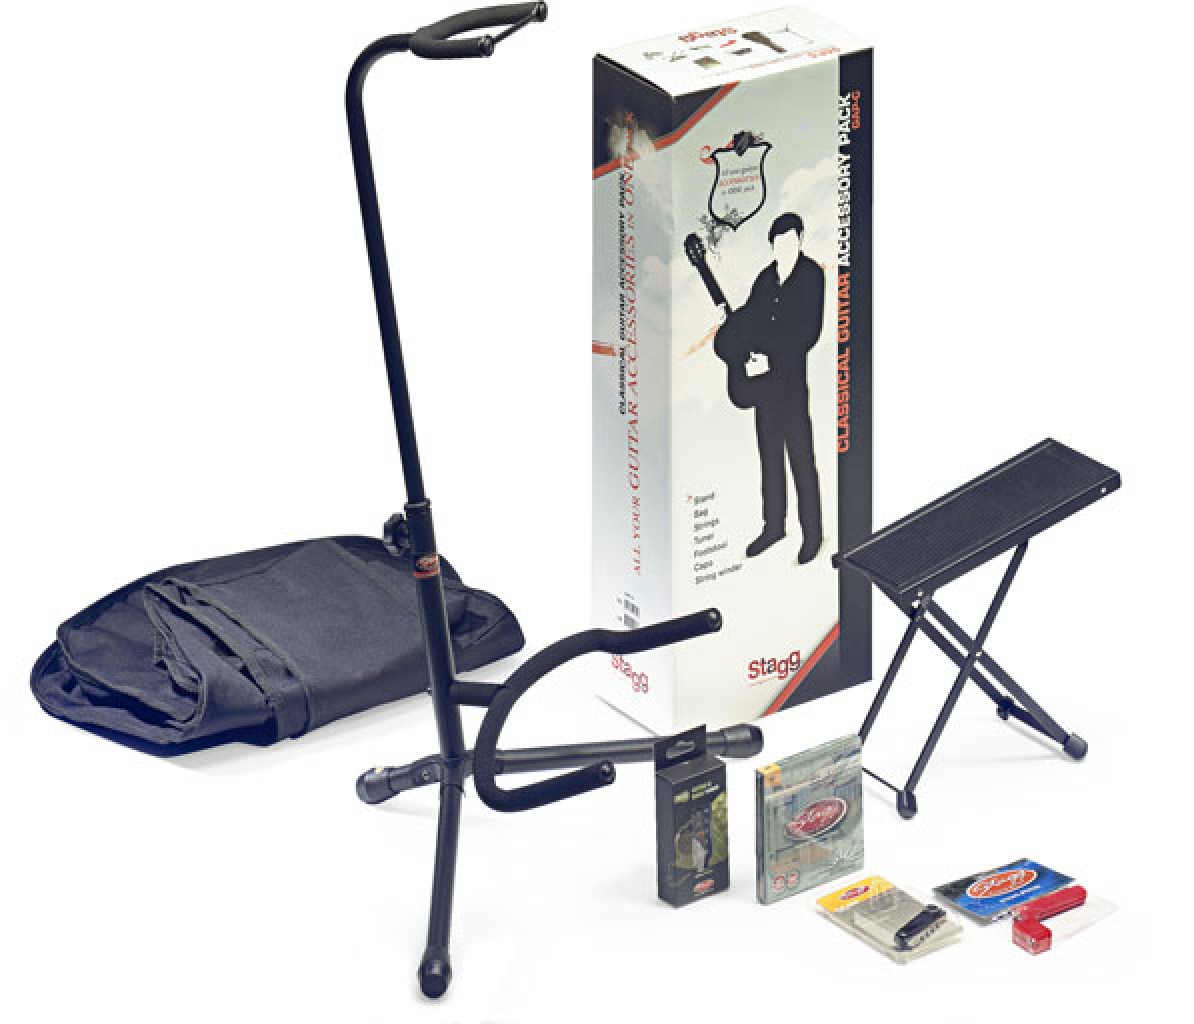 Accessory pack for classical guitar